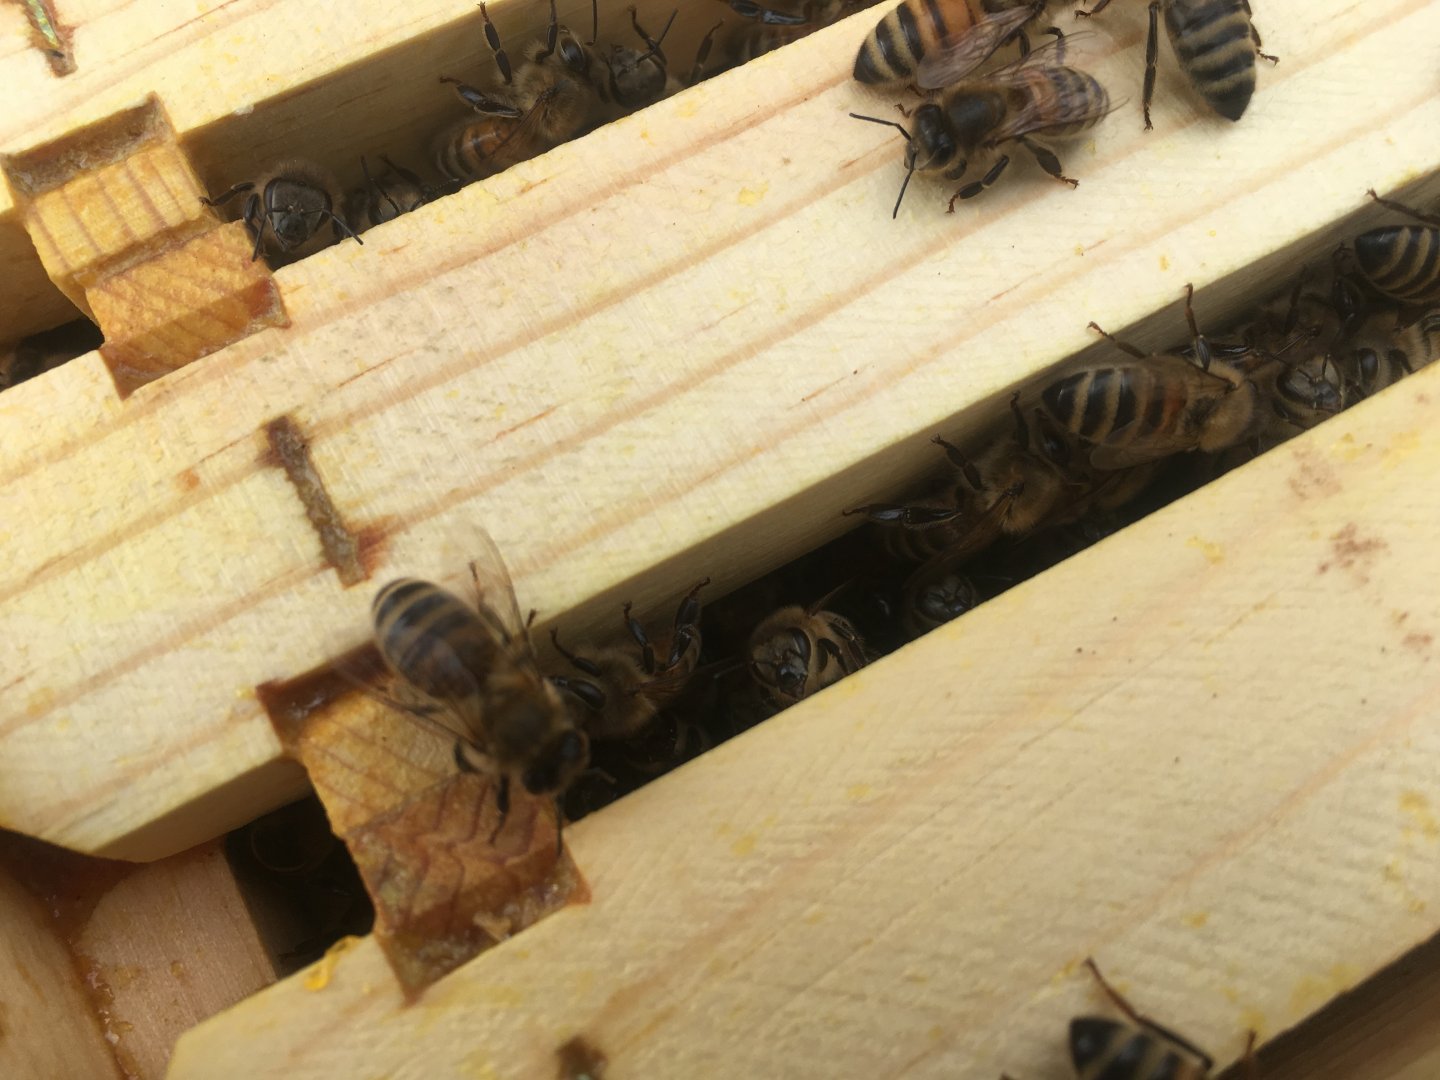 Close up photo of bees between hive frames